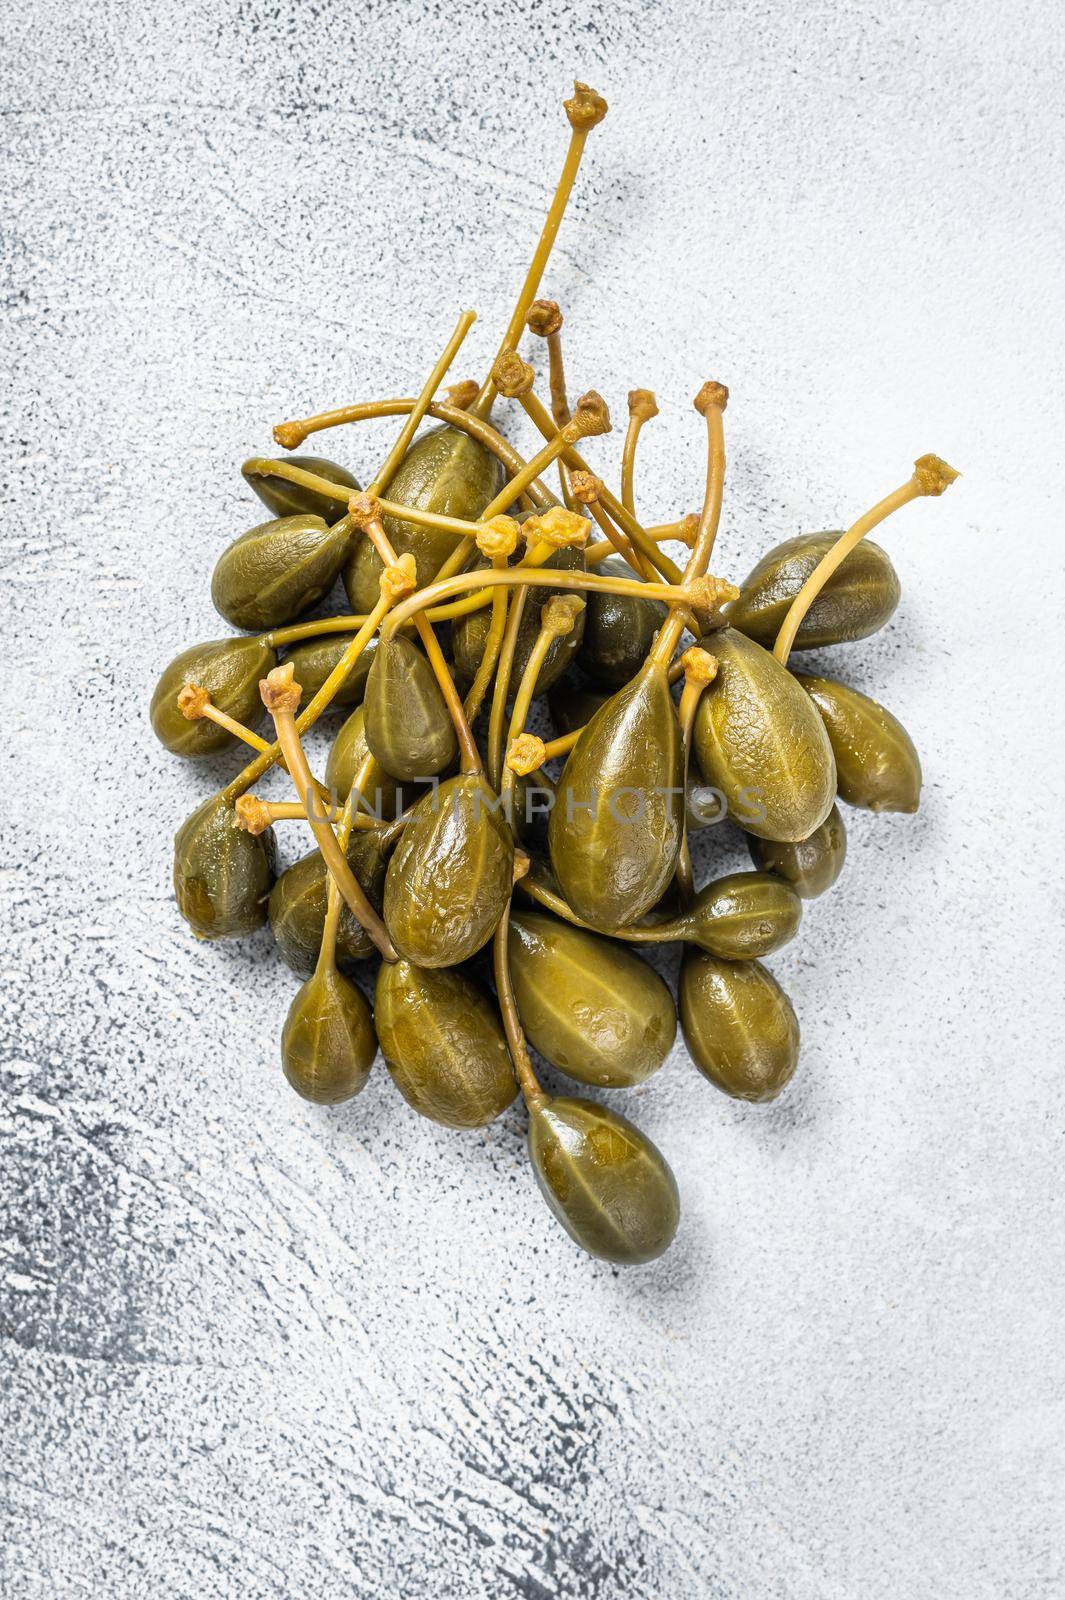 Pickled capers on a kitchen table. White background. Top view.